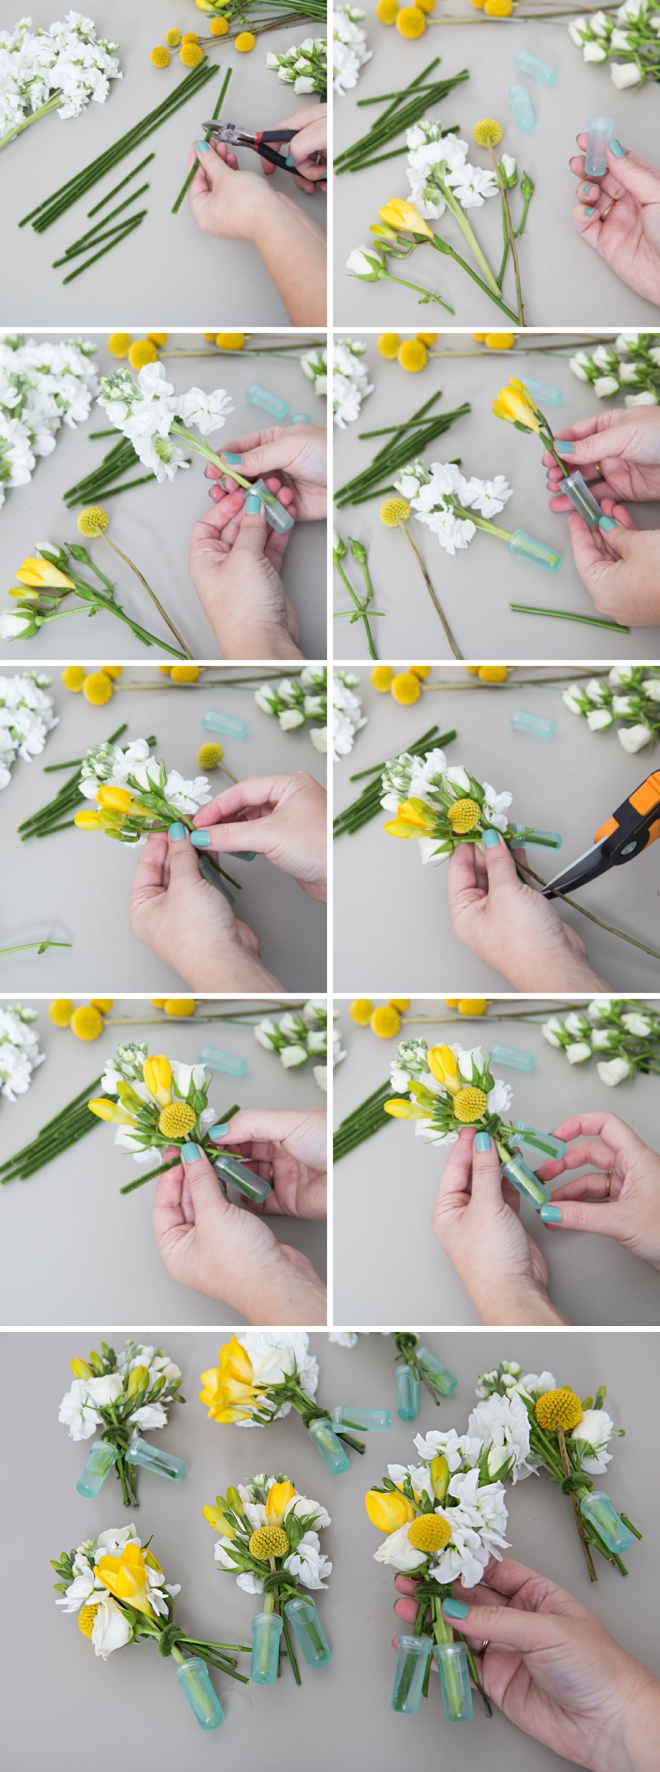 These DIY mini-bouquets are the absolute cutest!